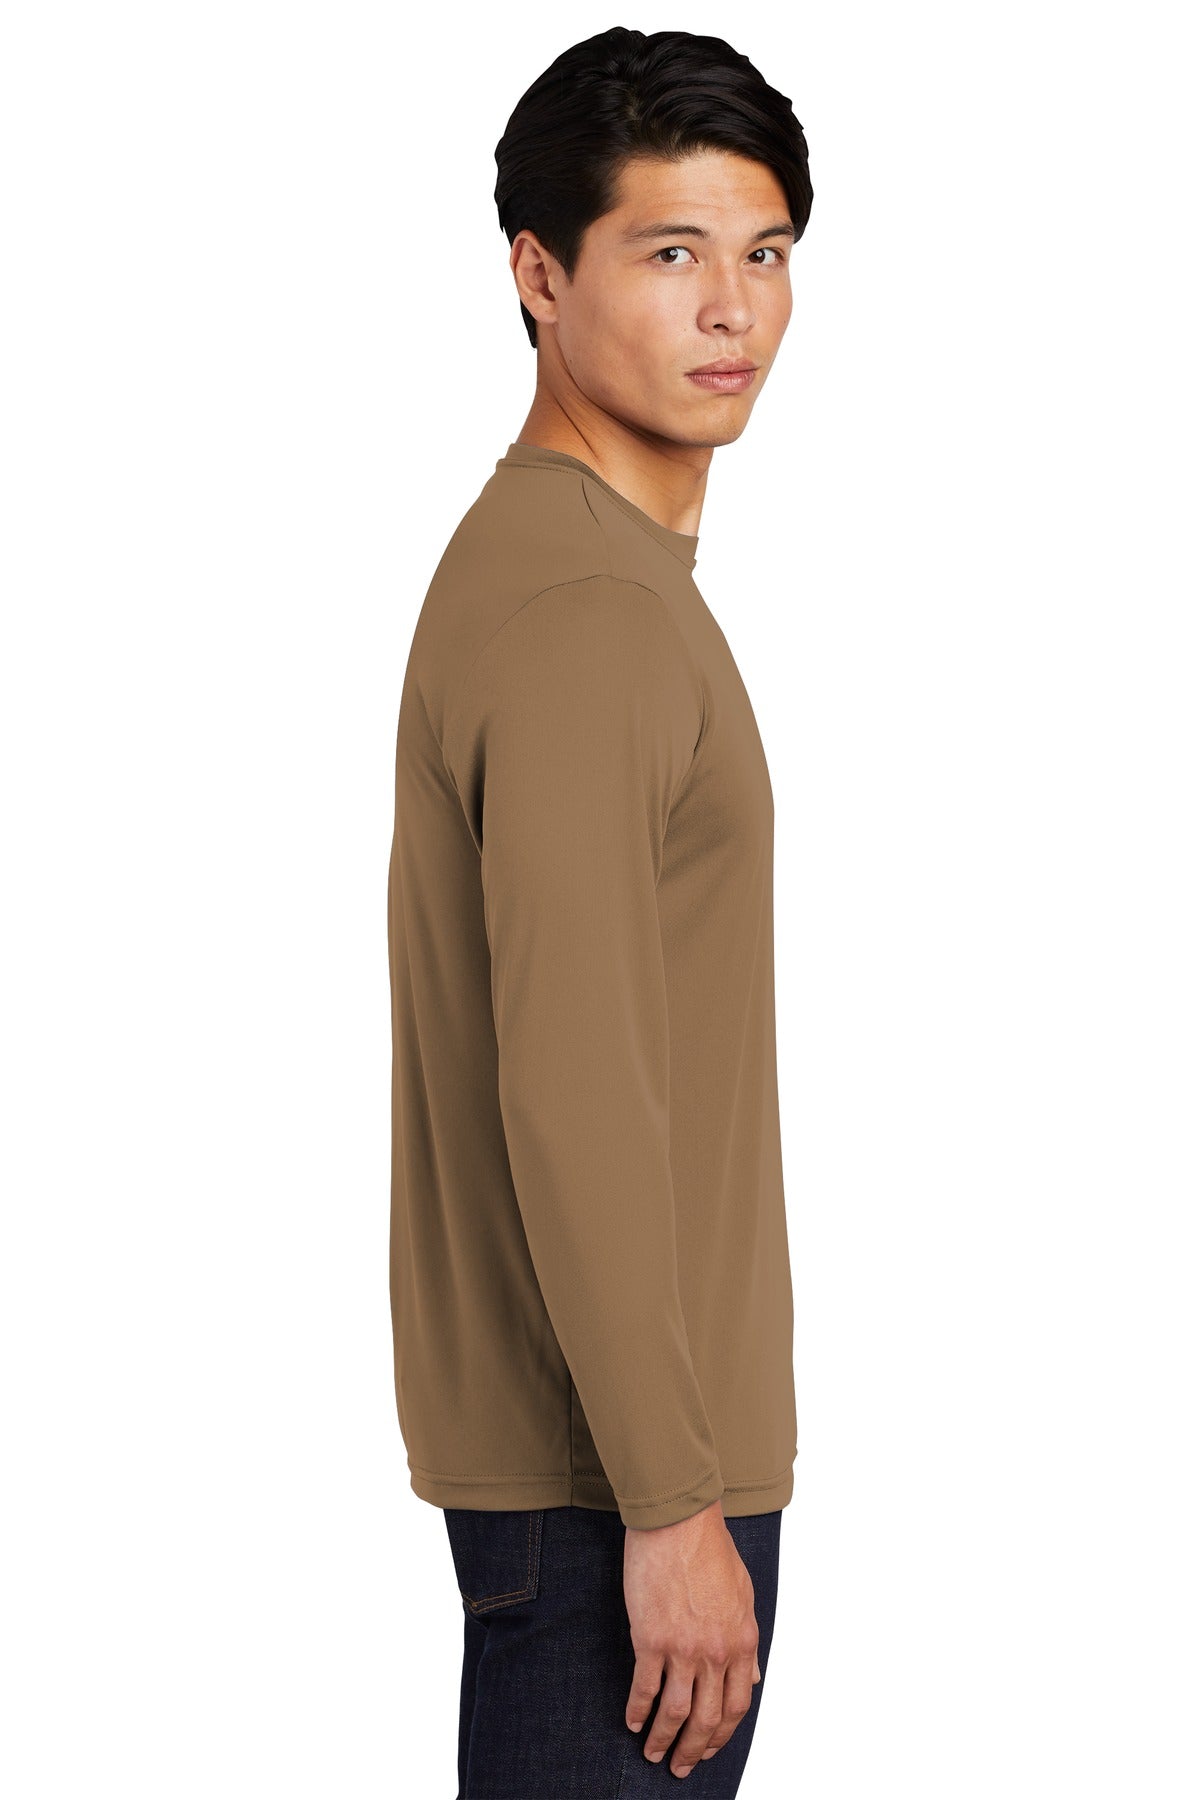 Sport-Tek® Long Sleeve PosiCharge® Competitor™ Tee. ST350LS [Woodland Brown] - DFW Impression